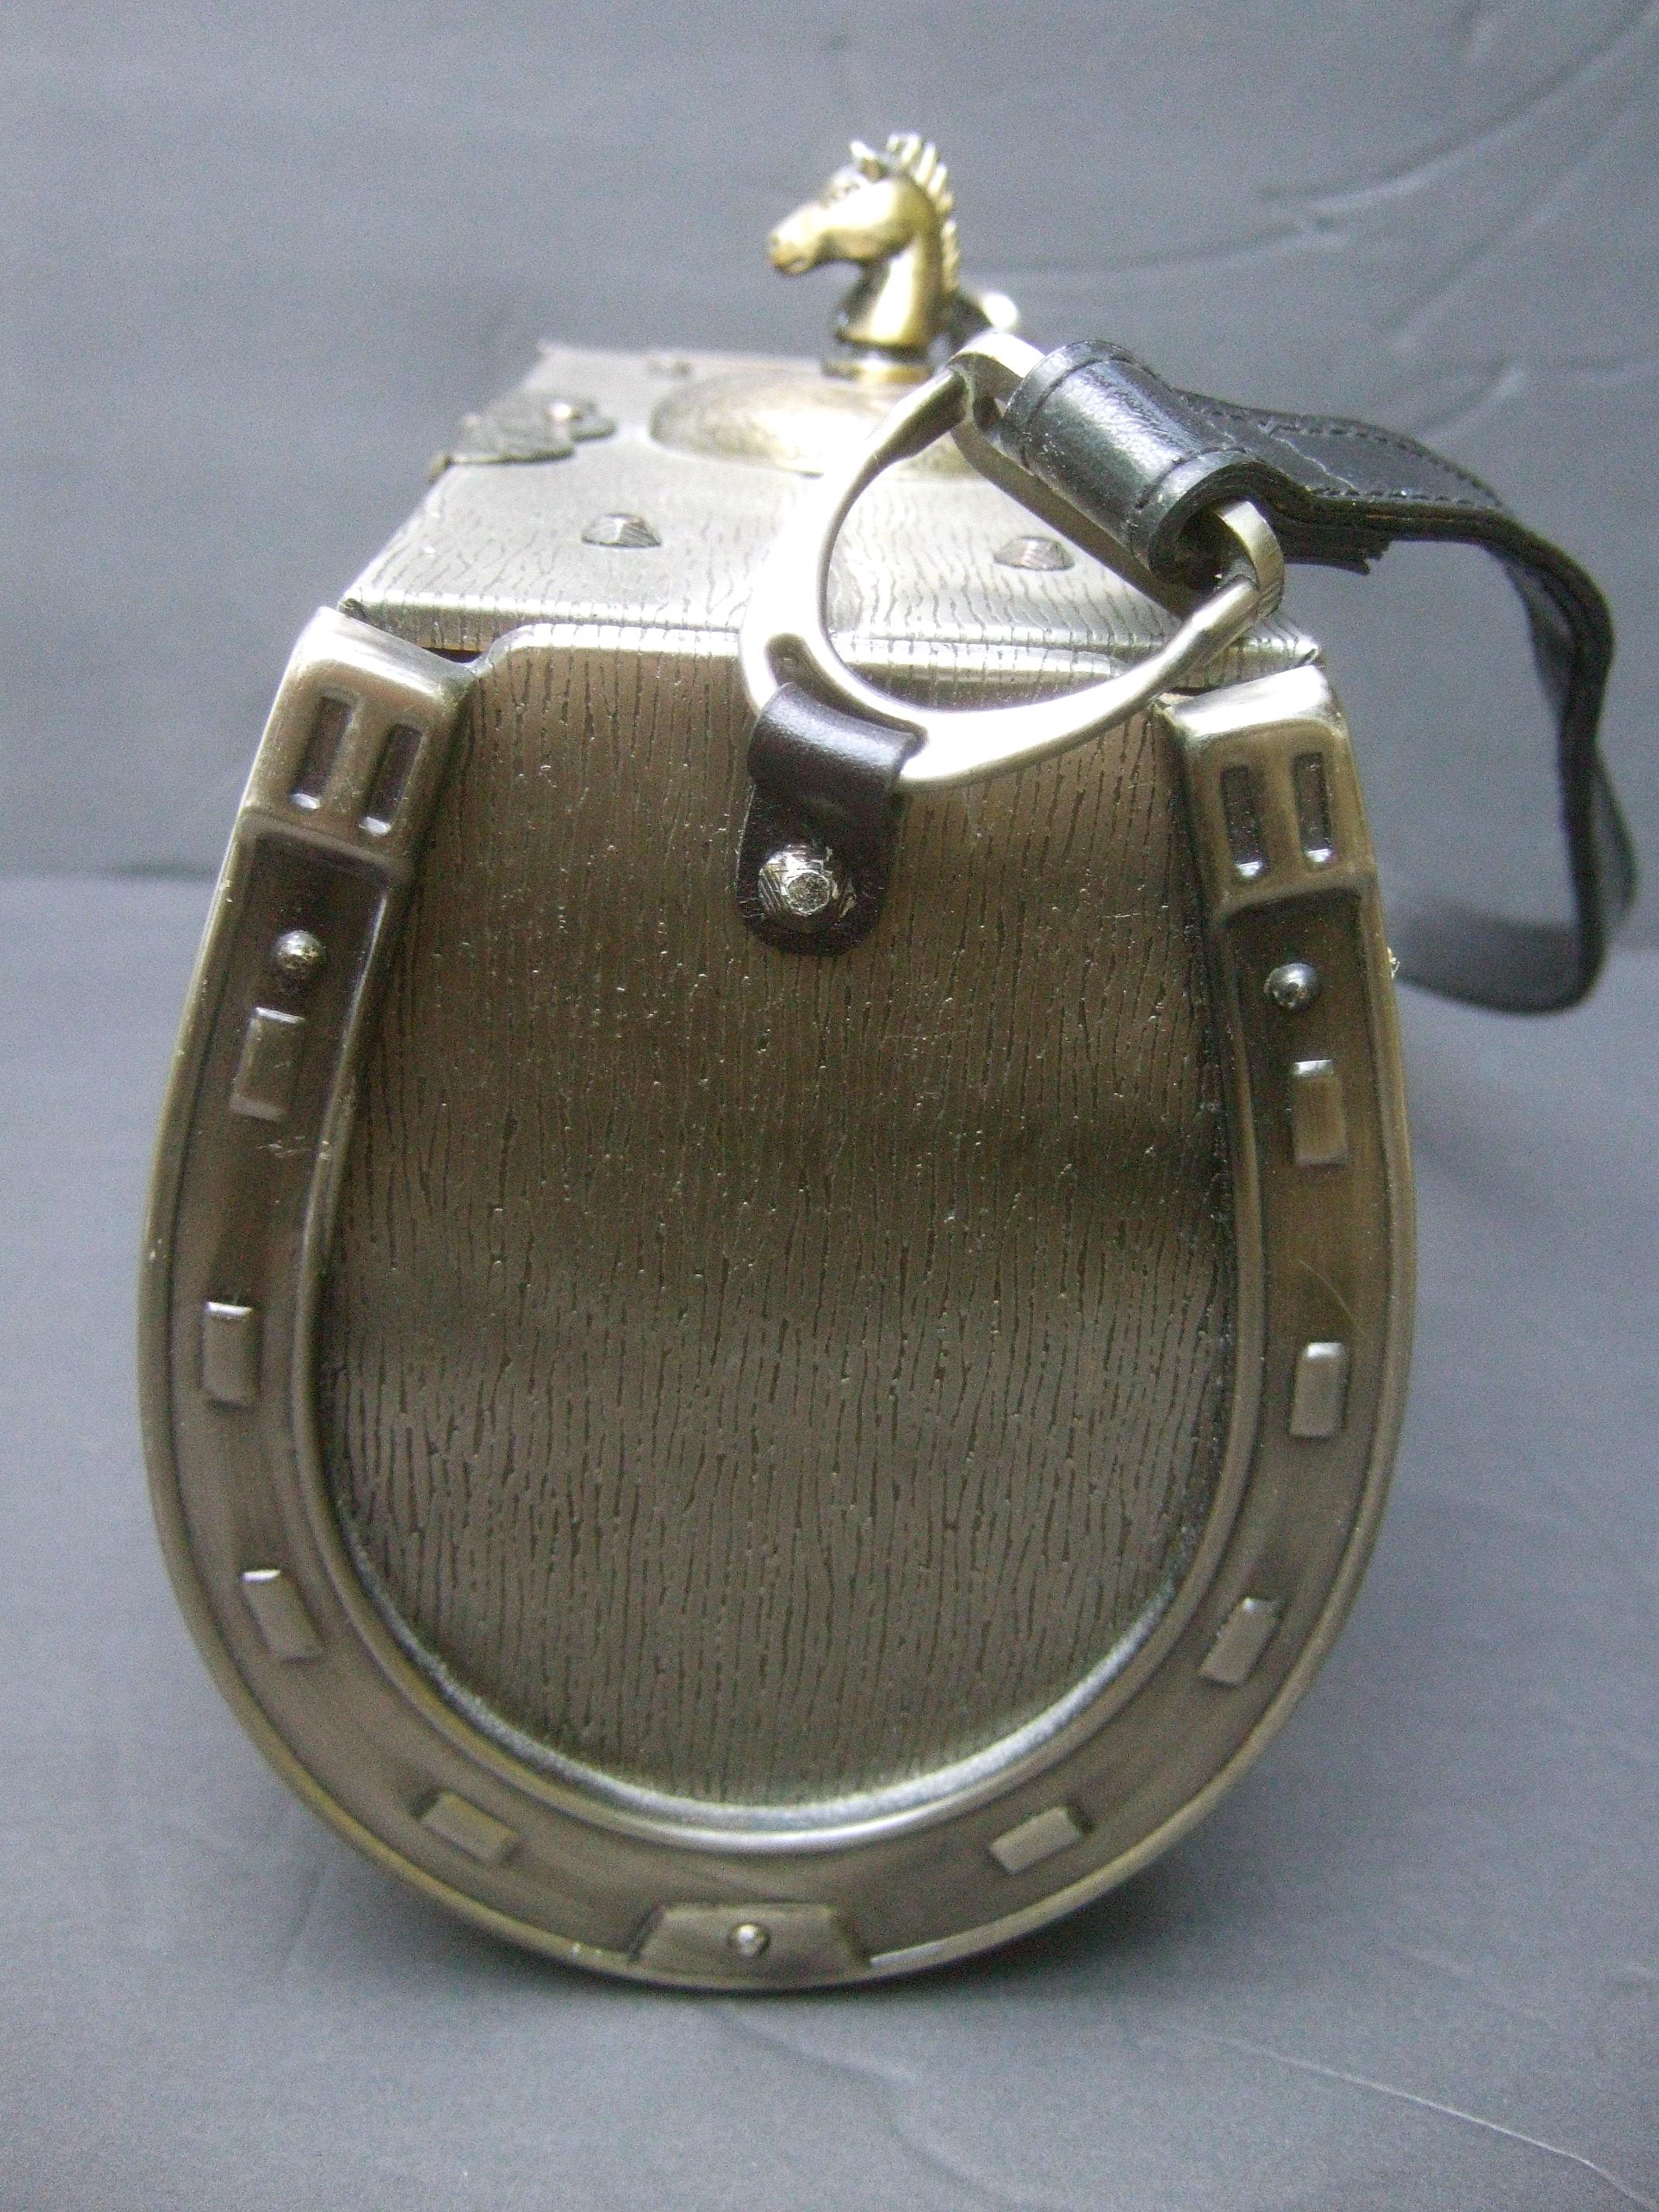 Avant-garde pewter mixed metal equine theme box purse c 1970s
The unique metal box purse is adorned with a burnished brass metal horse head mounted on top of the lid cover 

All sides of the cylinder trunk purse are constructed with pewter tone